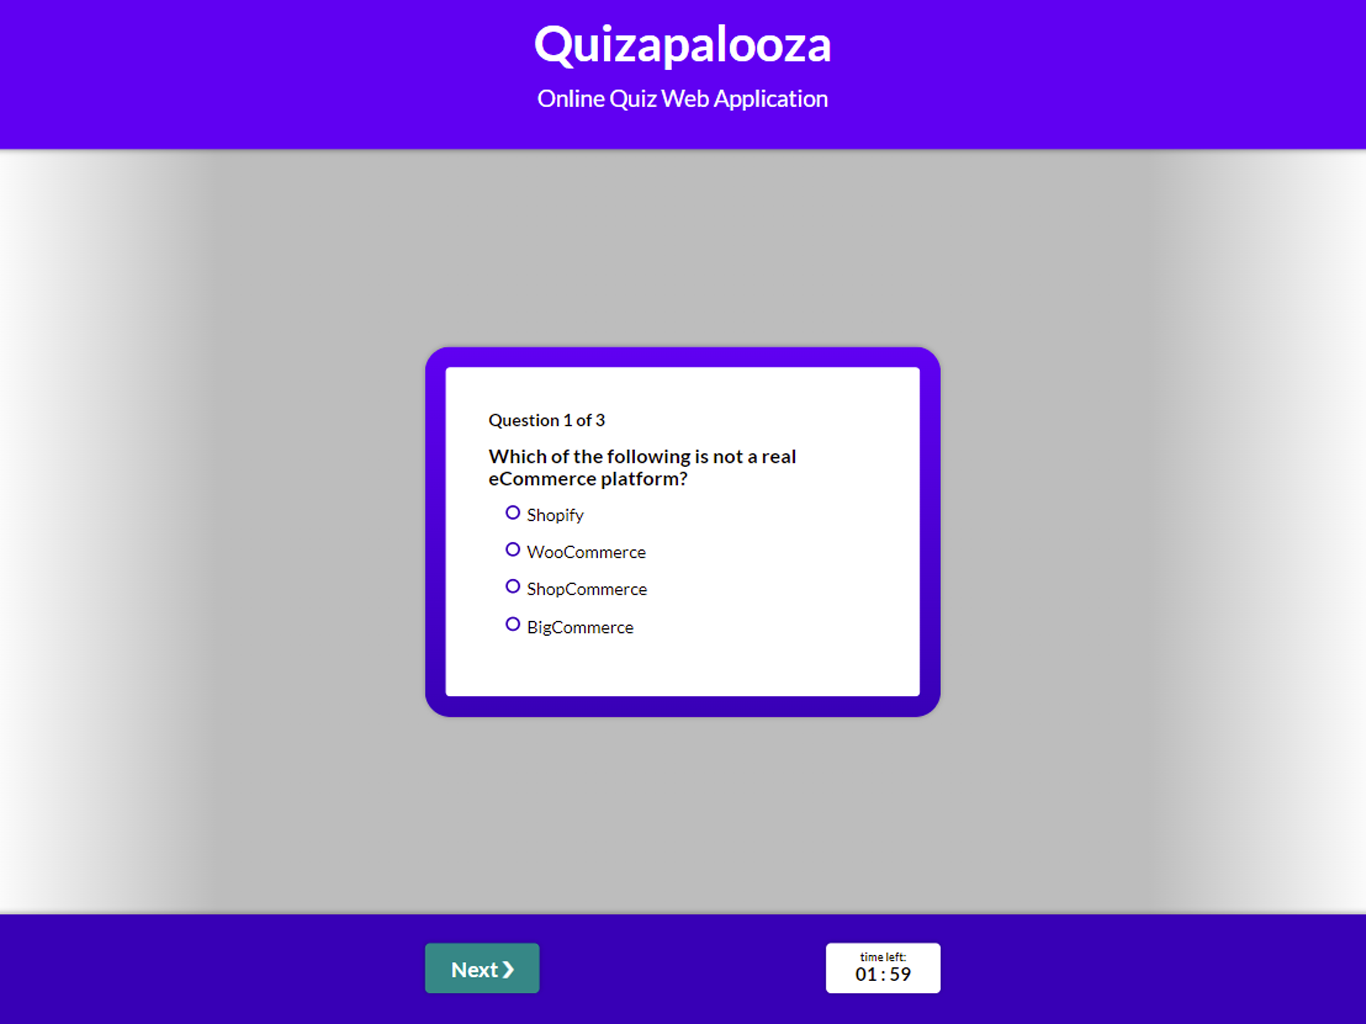 Display of webpage for an online eCommerce quiz application titled, 'Quizapalooza'.